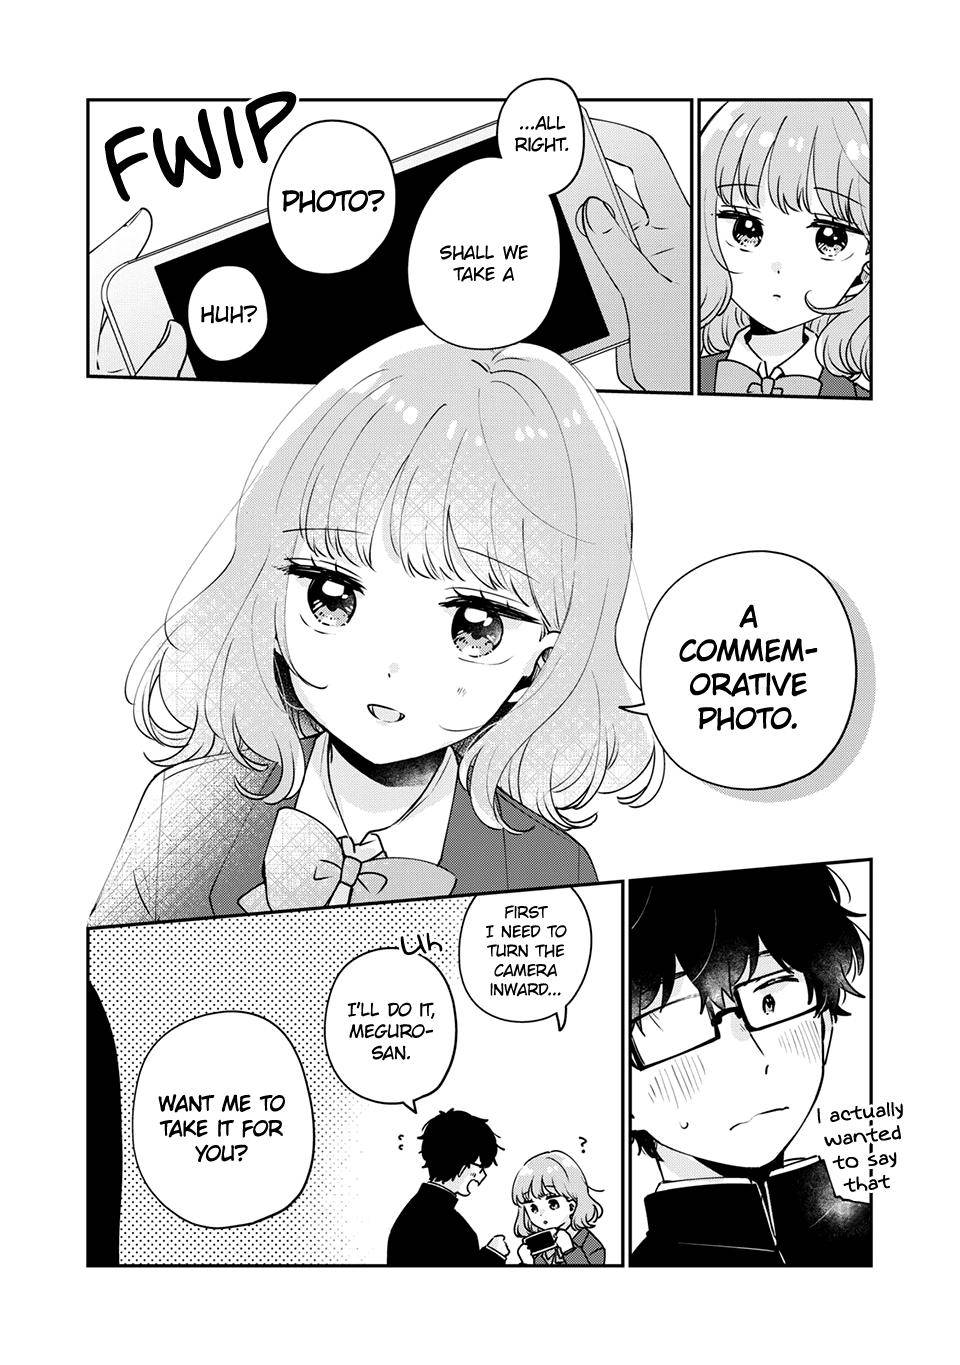 It's Not Meguro-san's First Time chapter 47 page 7